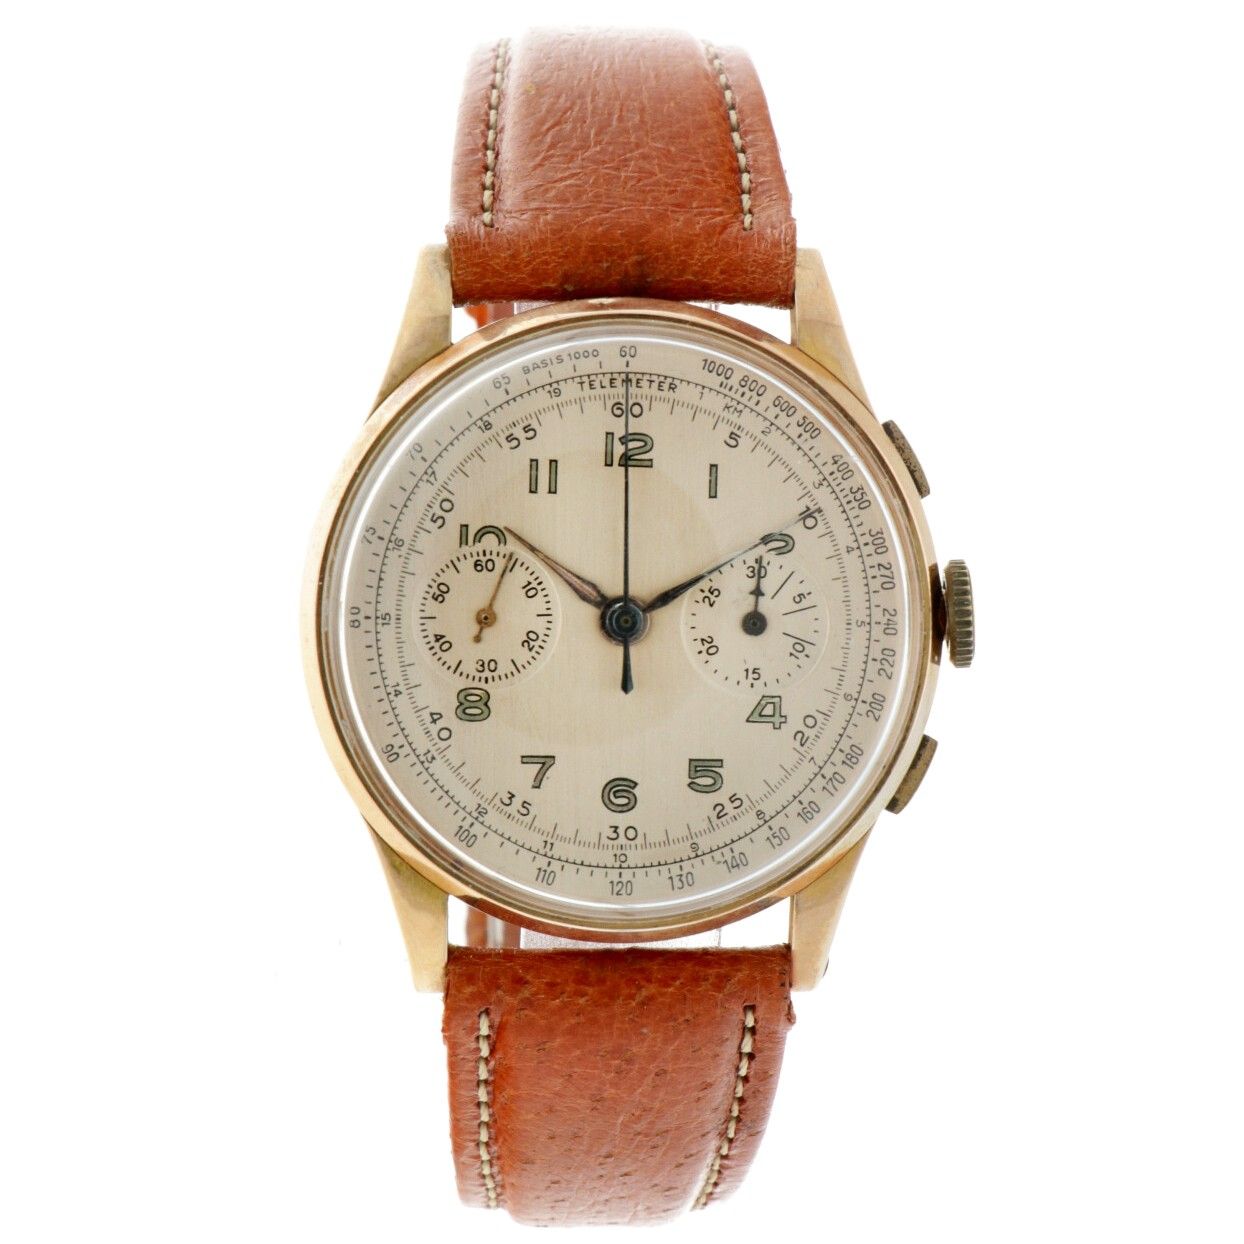 Chronograph - Men's watch - approx. 1950. Case: rose gold (18 kt.) - strap: leat&hellip;